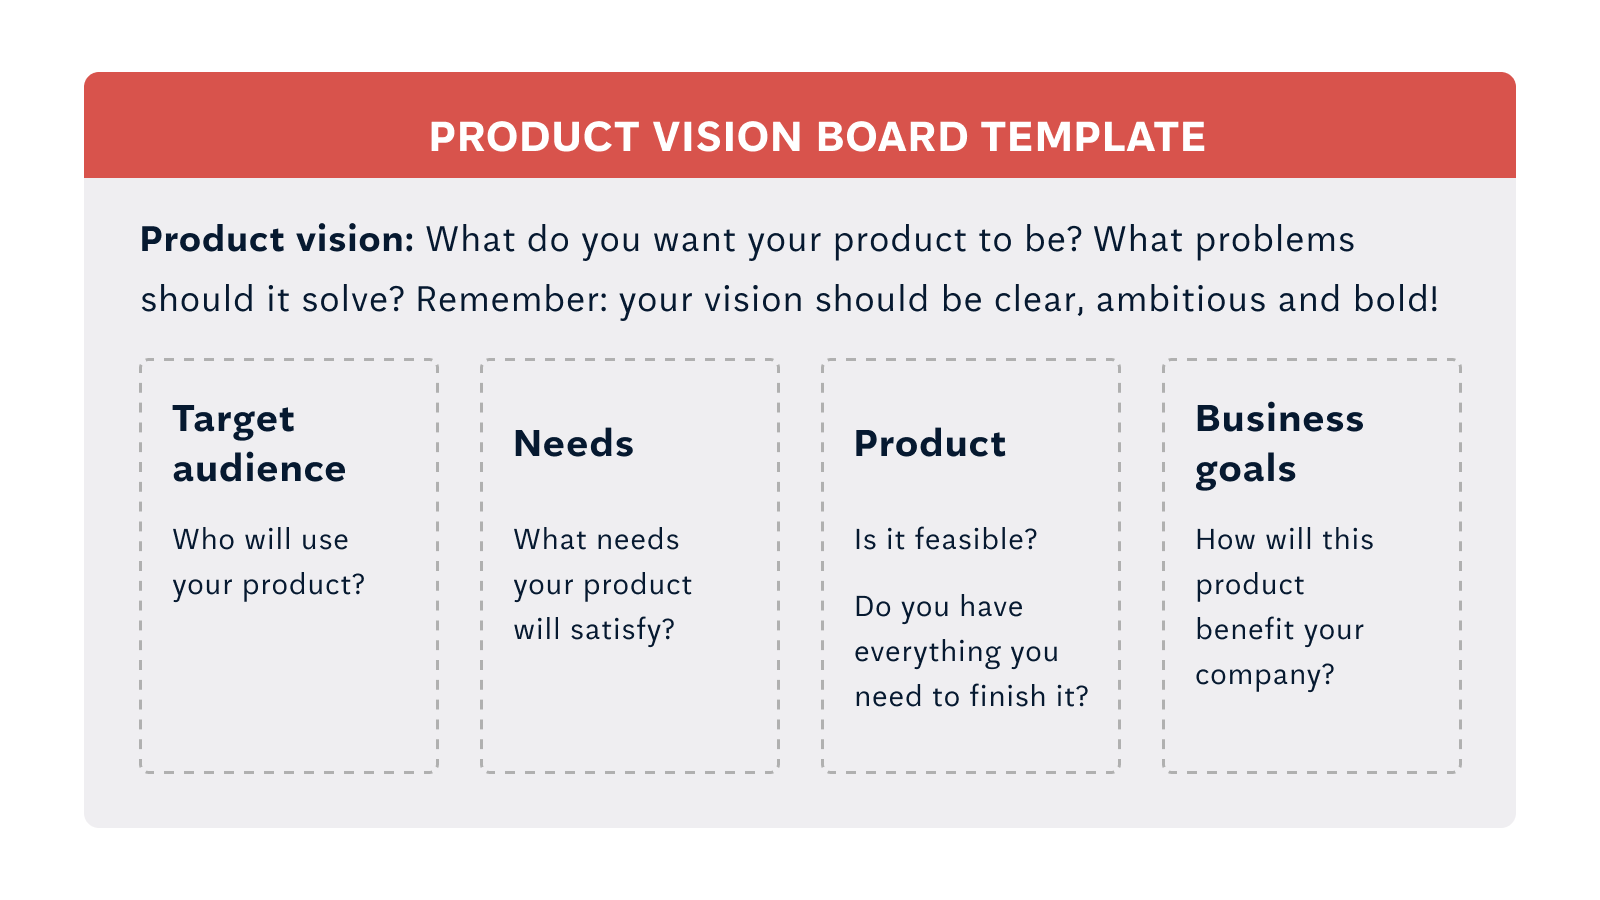 Product vision board template